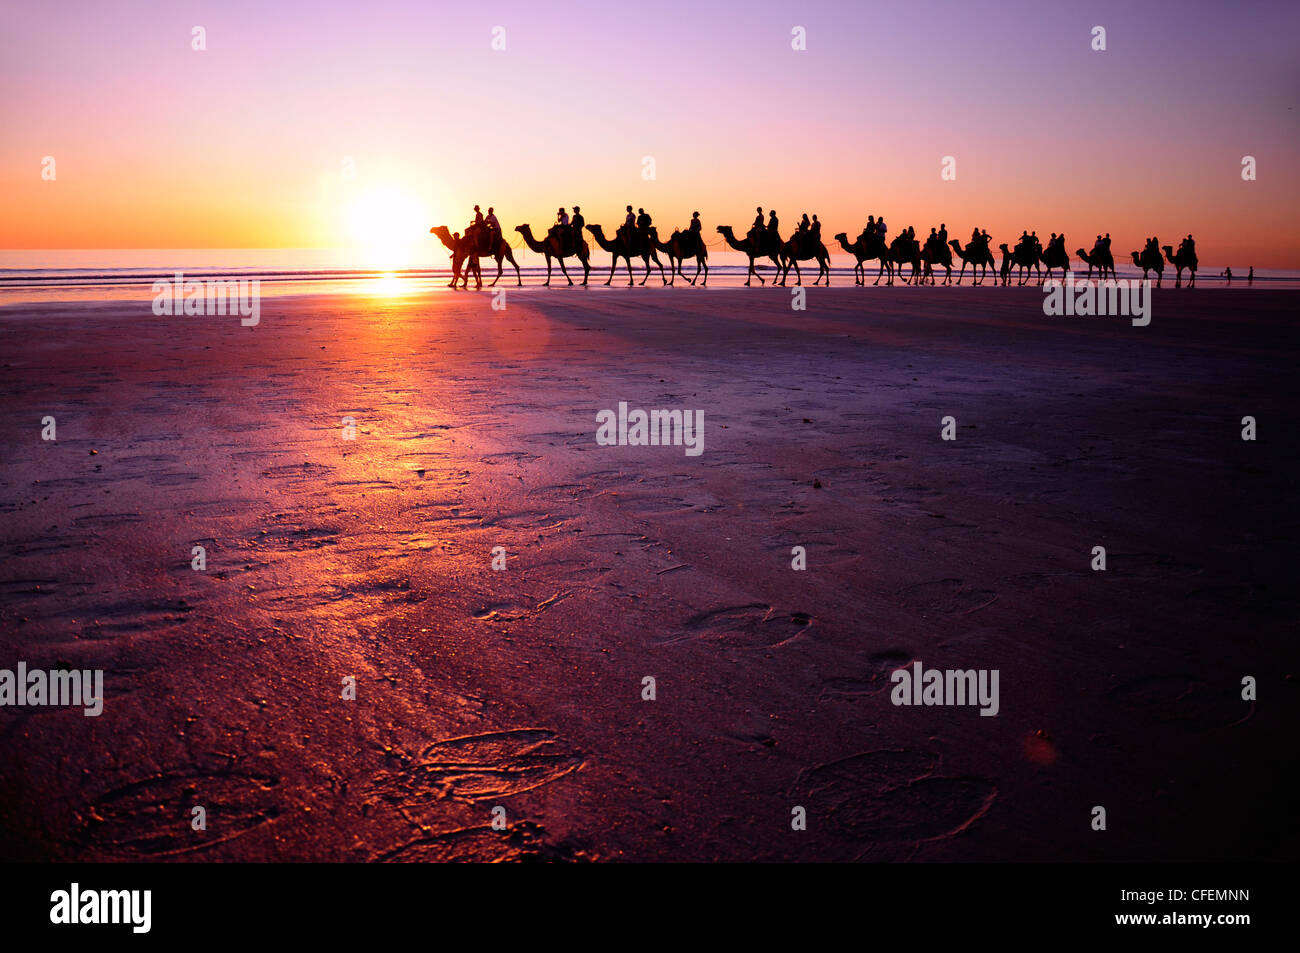 Beach Camels Stock Photo